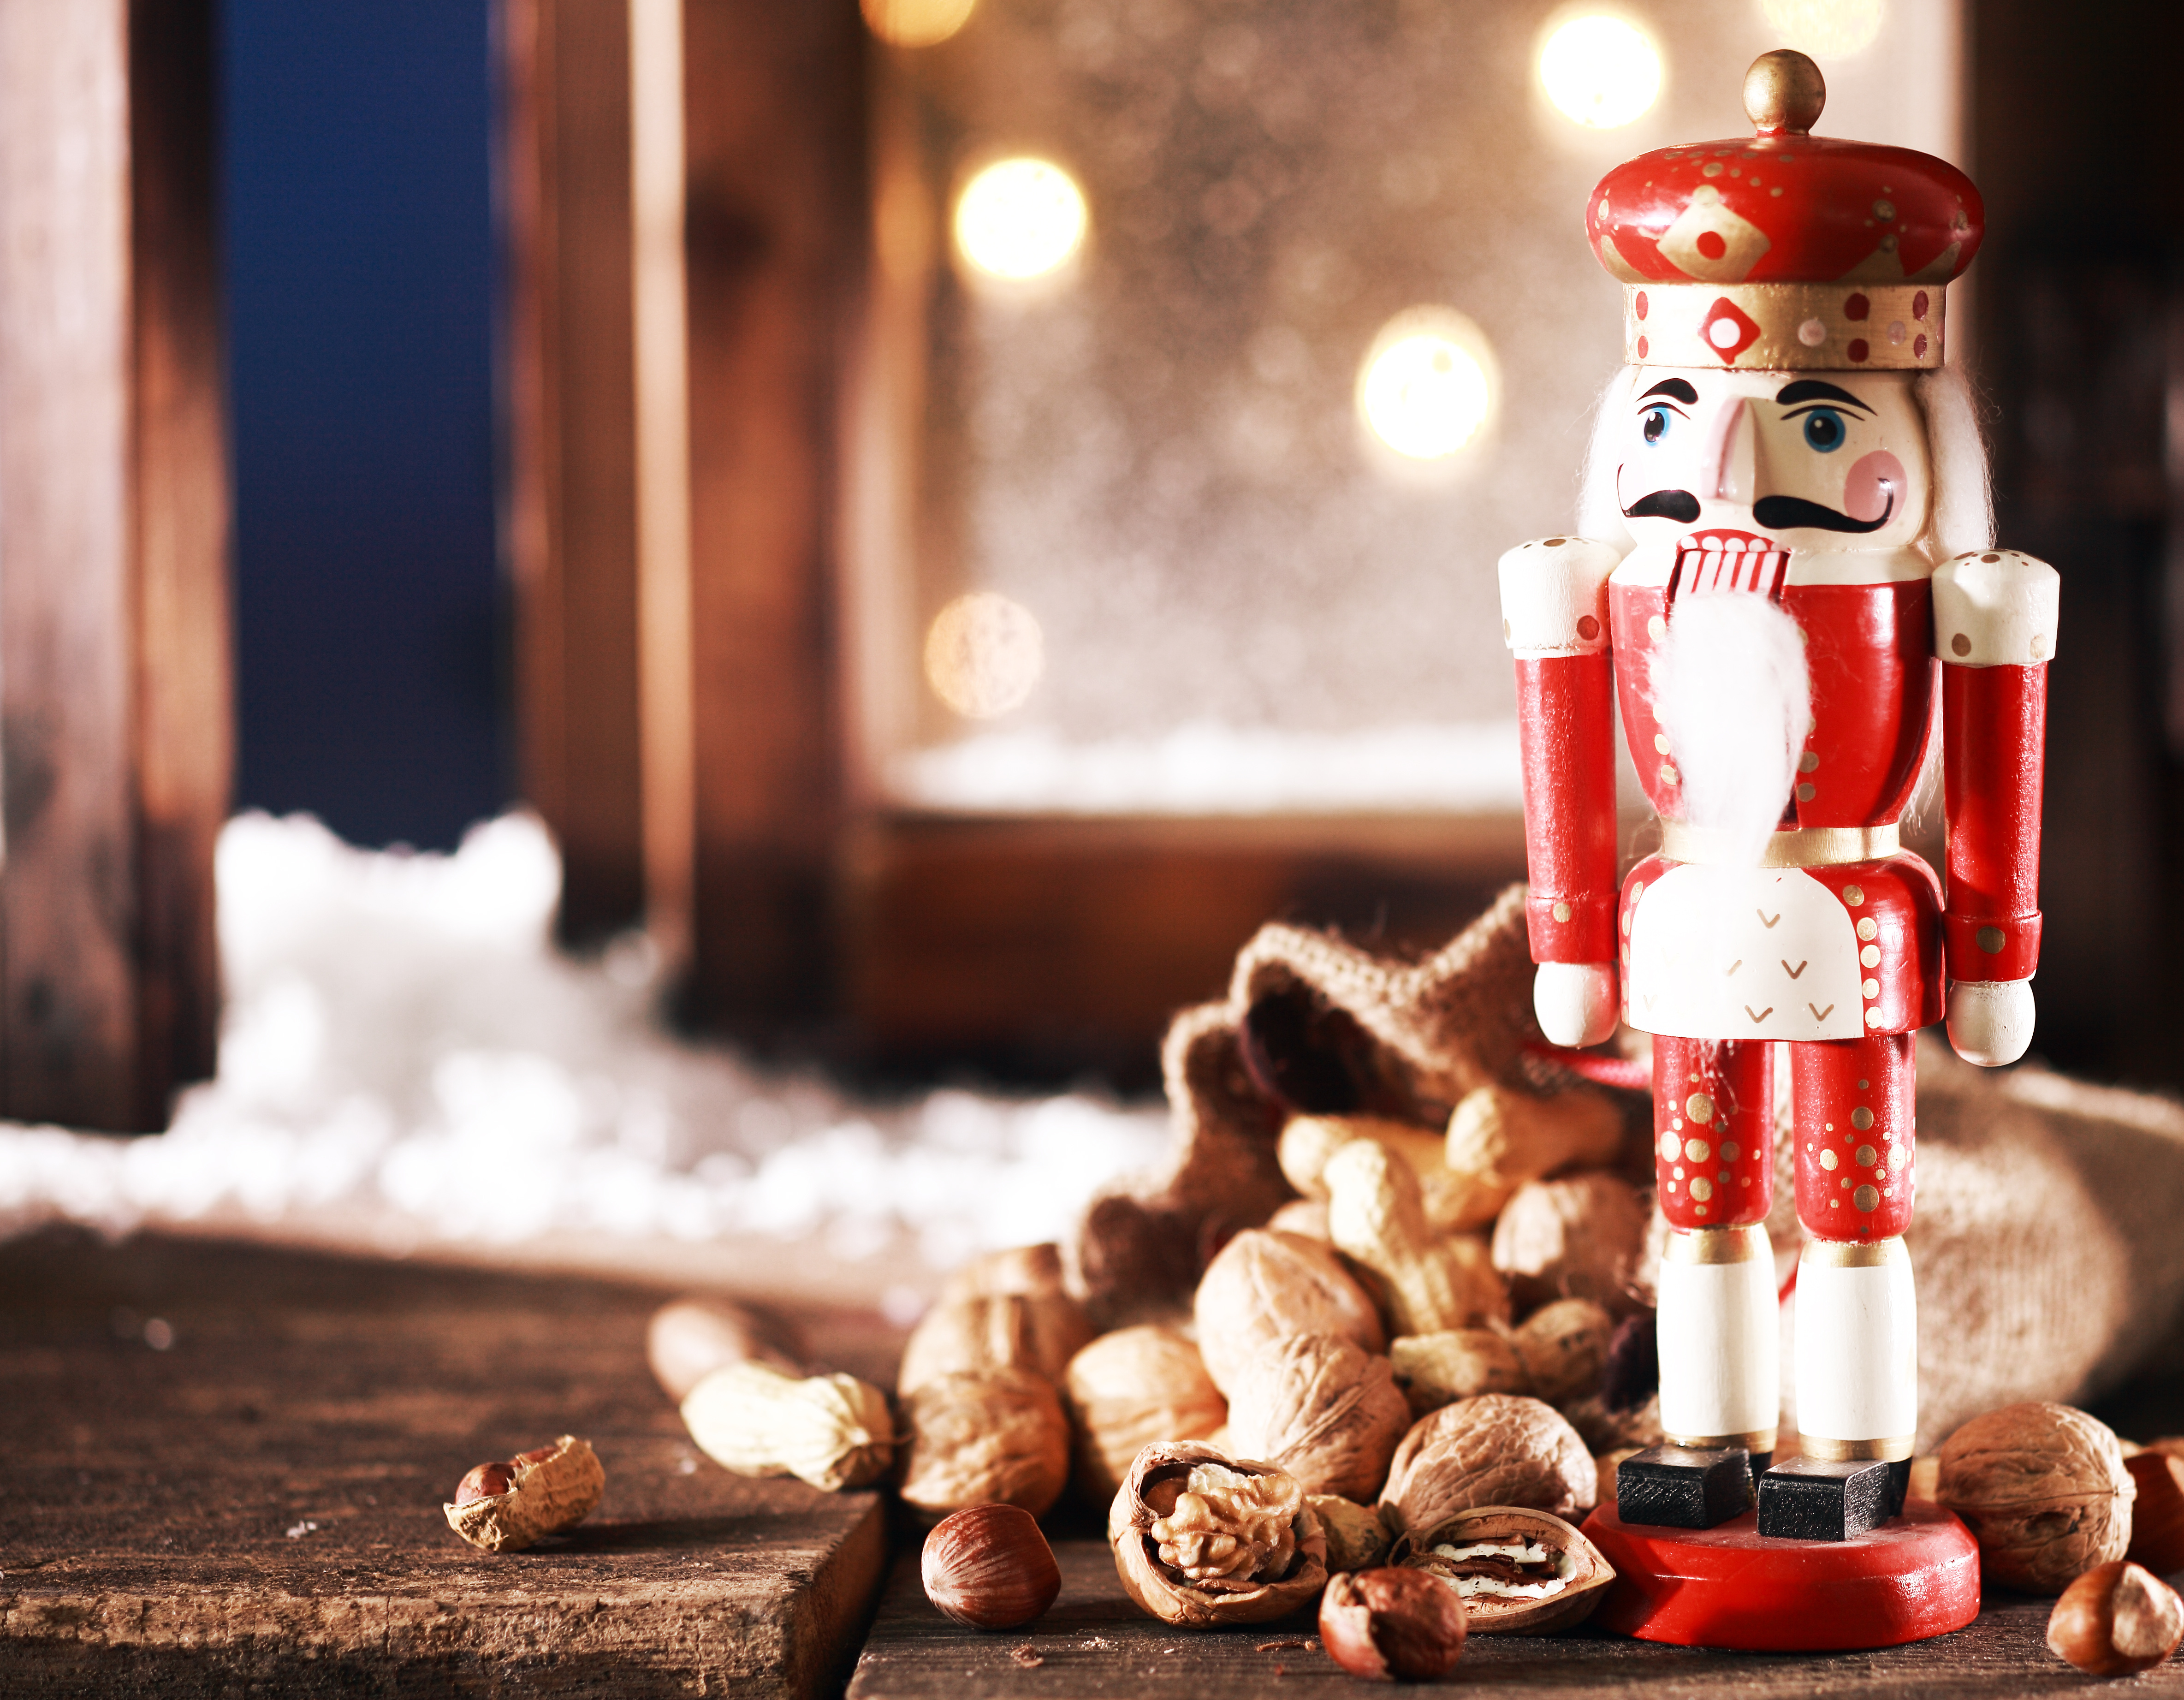 nutcracker-and-nuts-on-wooden-table